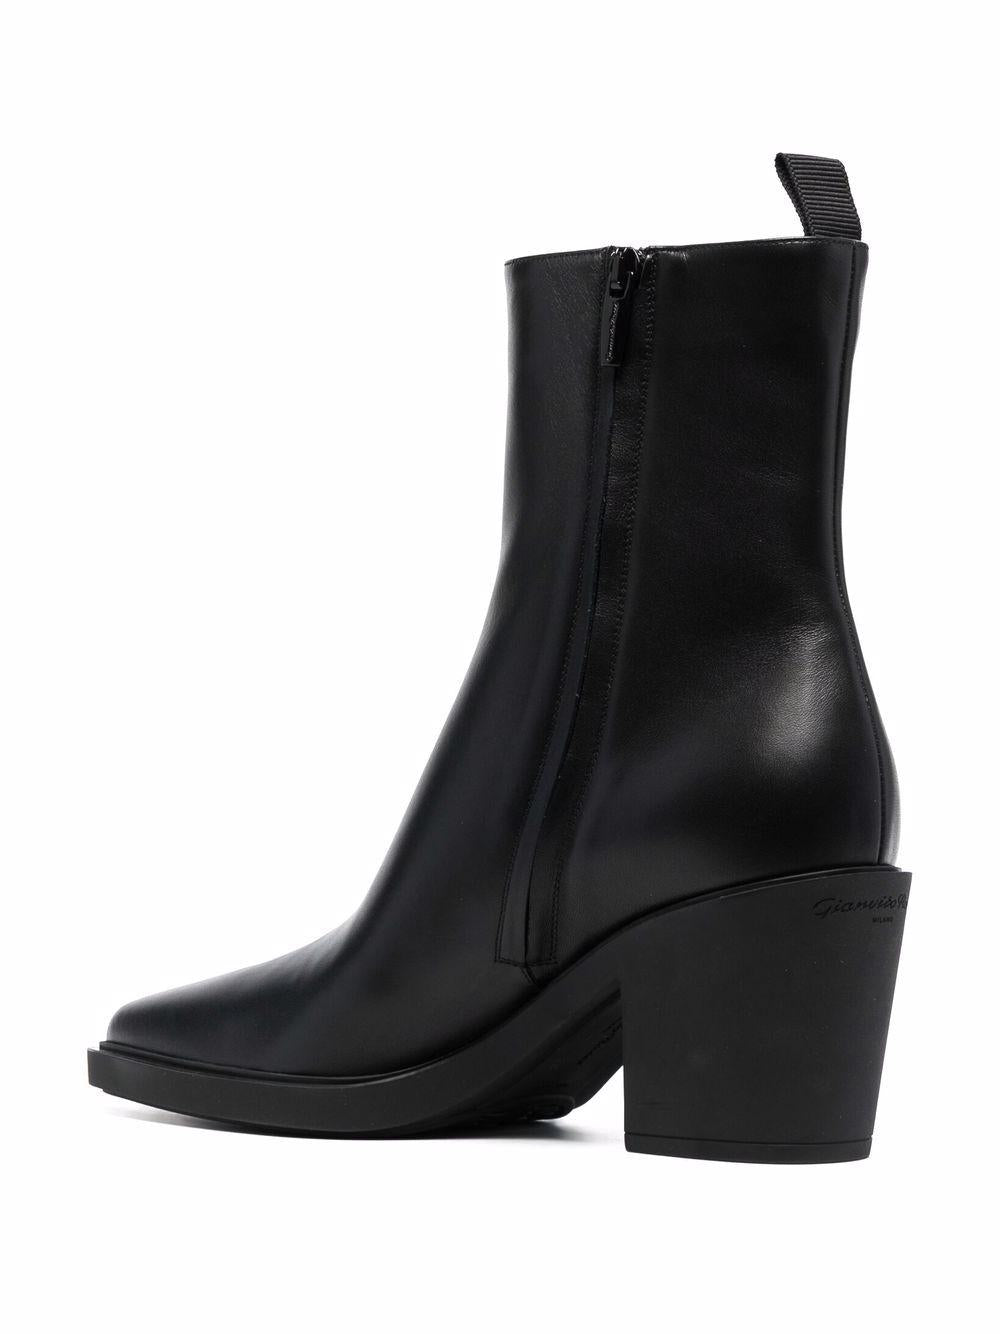 SS23 Women's Black Rubber Boots by Gianvito Rossi